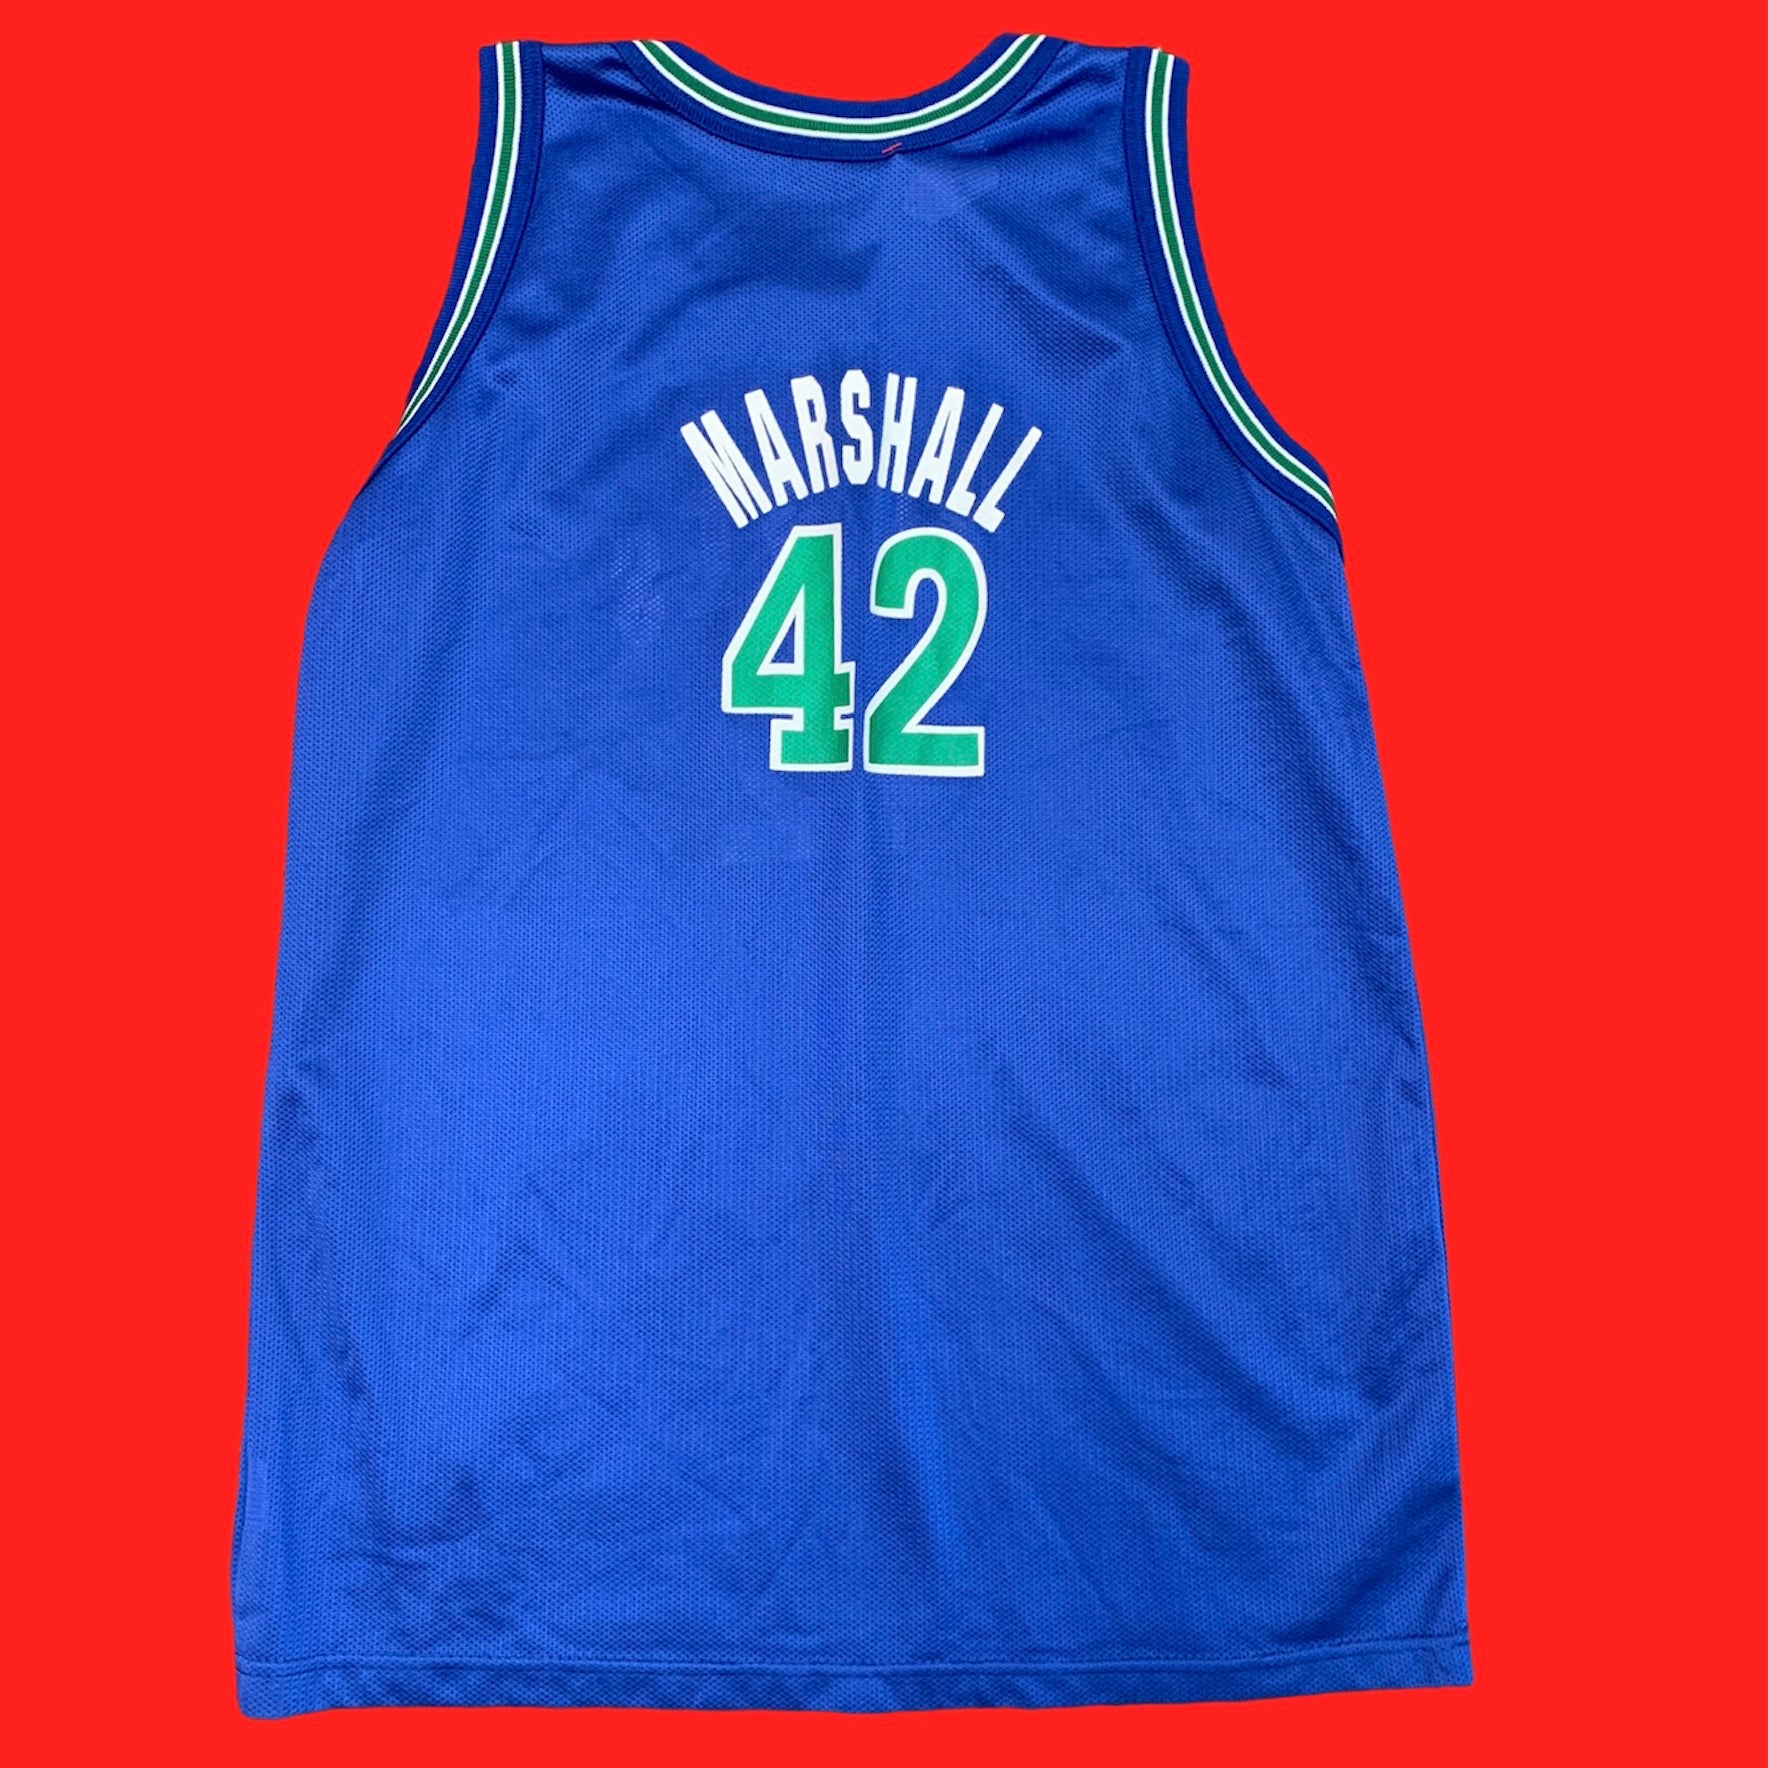 Marshall Wolves Champion Jersey S